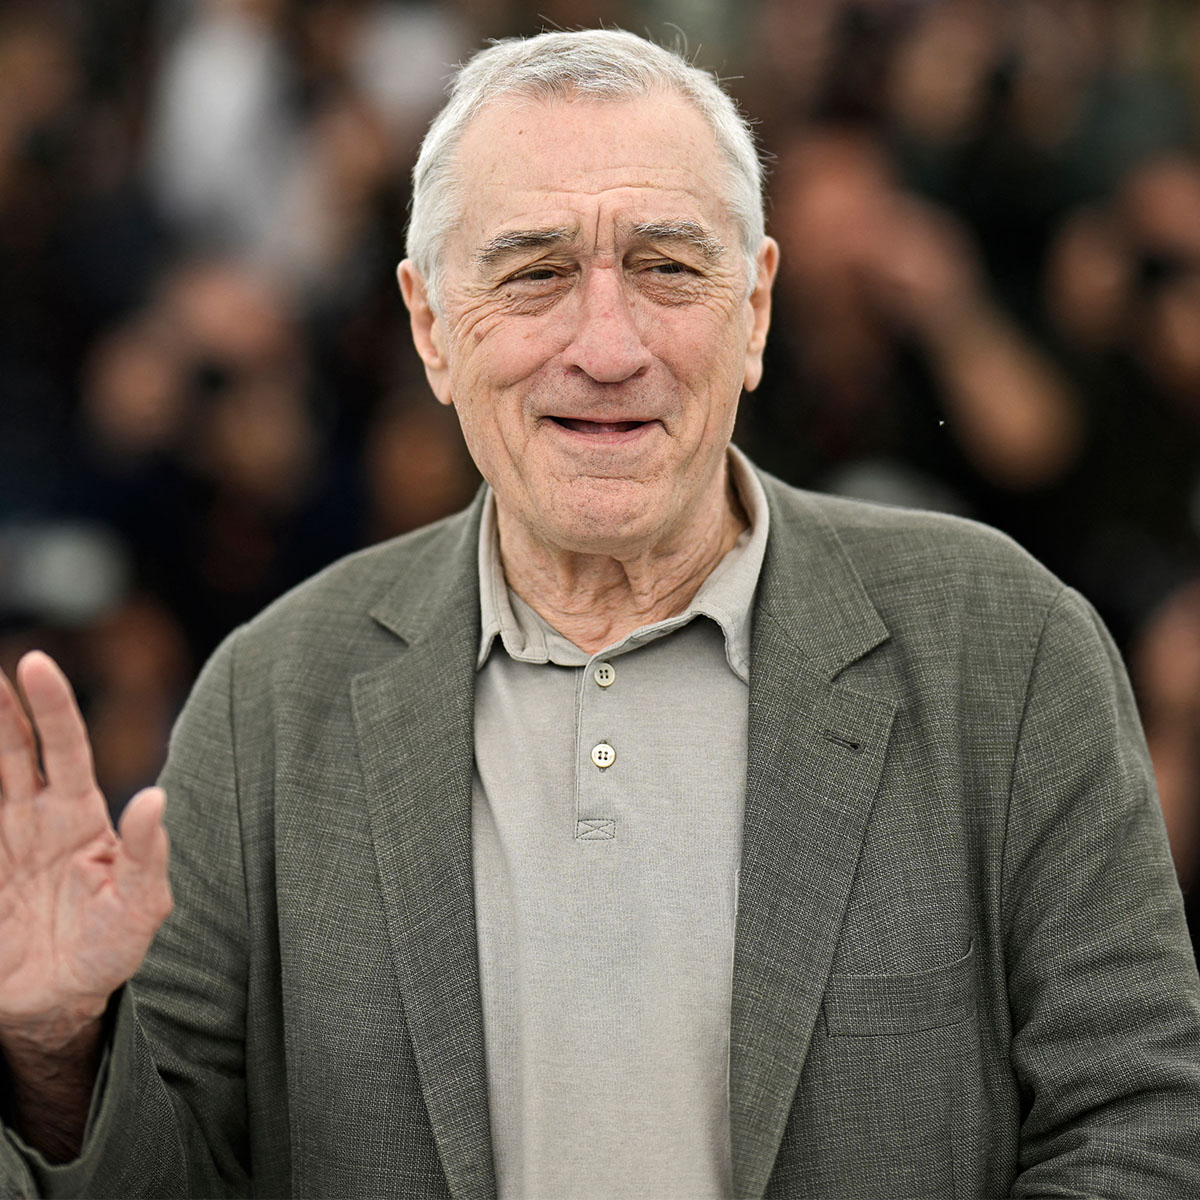 Robert De Niro Gets Emotional Over Becoming a Dad Again to Baby Gia